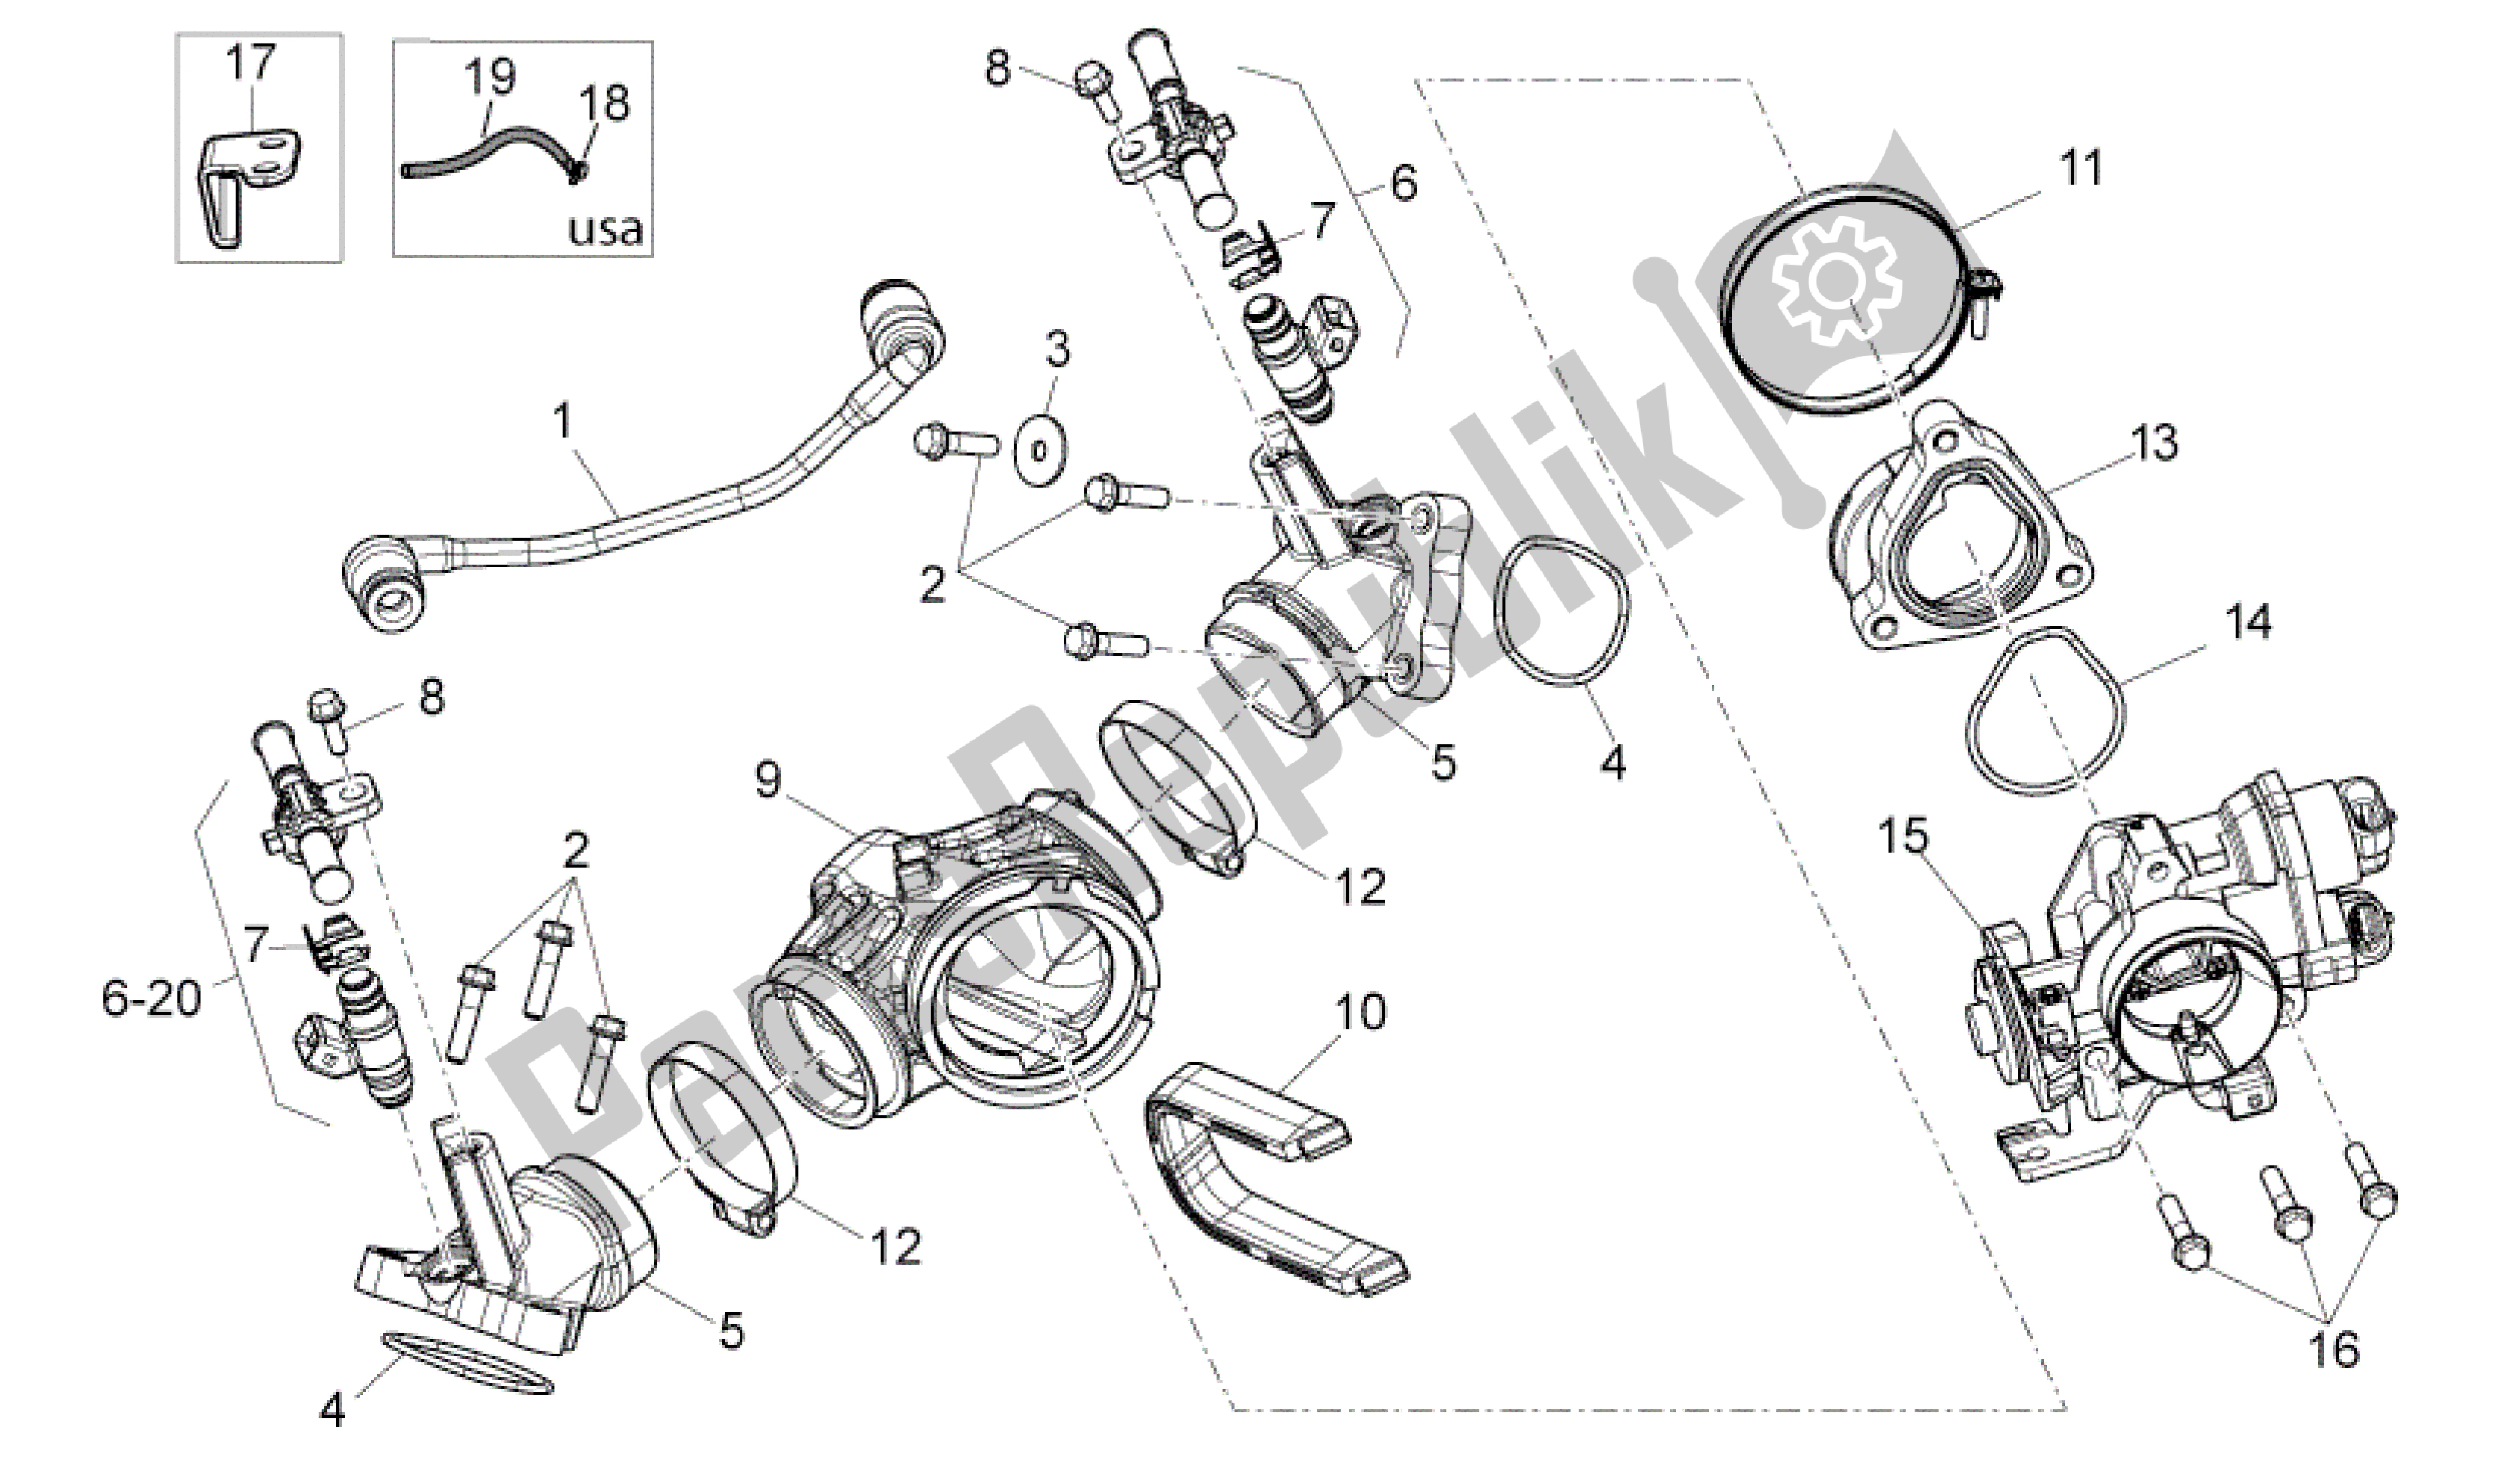 All parts for the Throttle Body of the Aprilia Mana 850 2007 - 2011